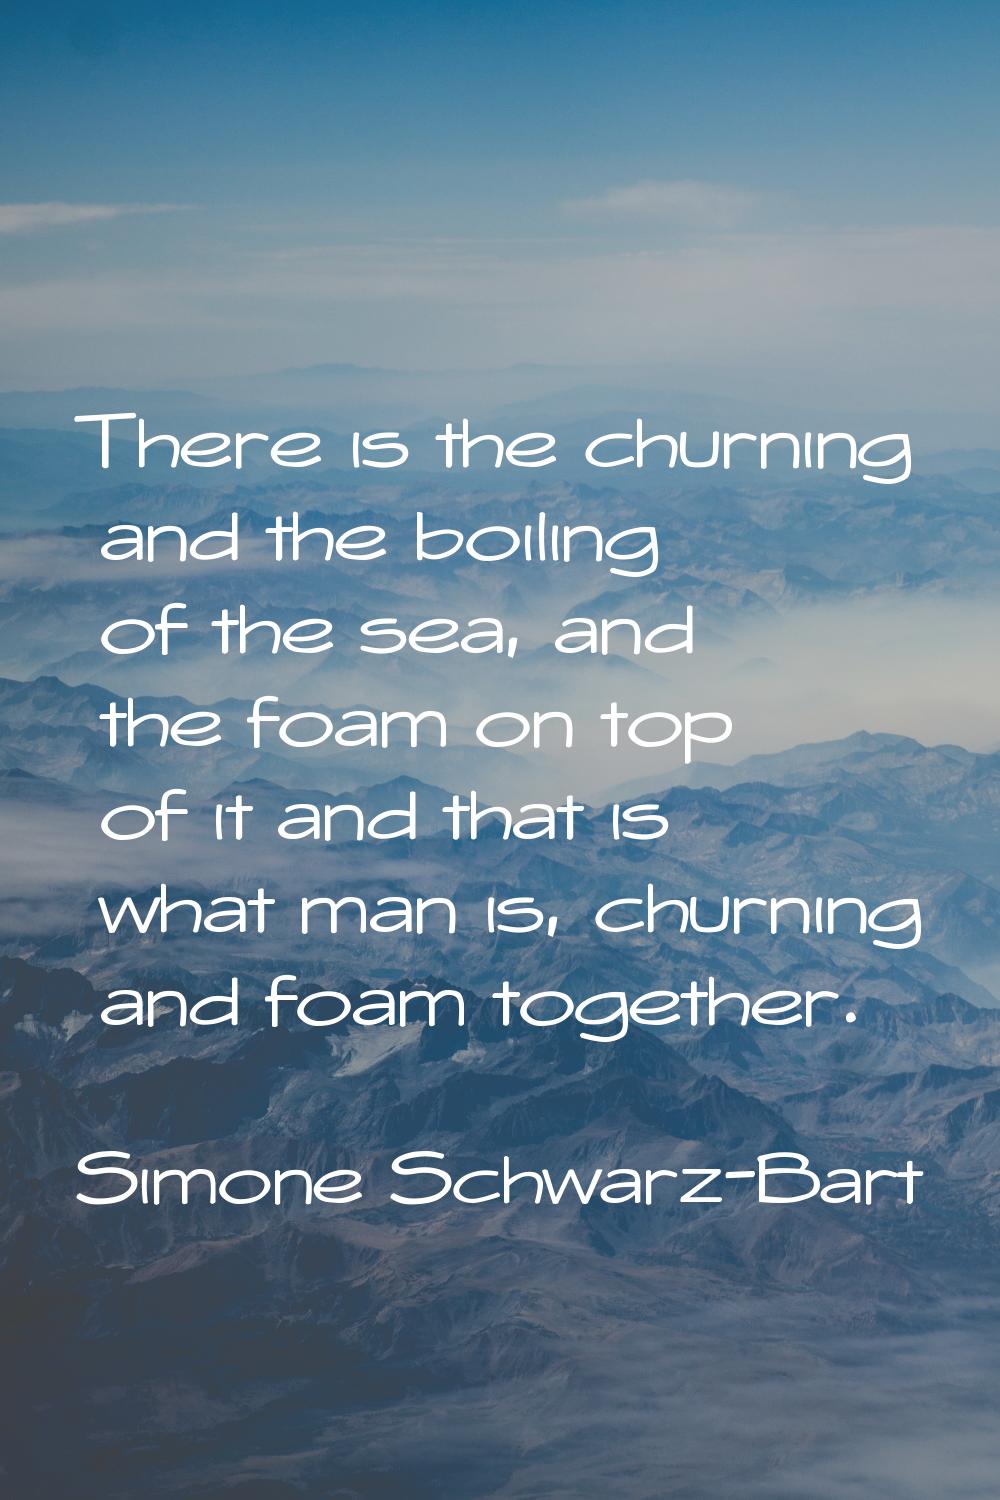 There is the churning and the boiling of the sea, and the foam on top of it and that is what man is